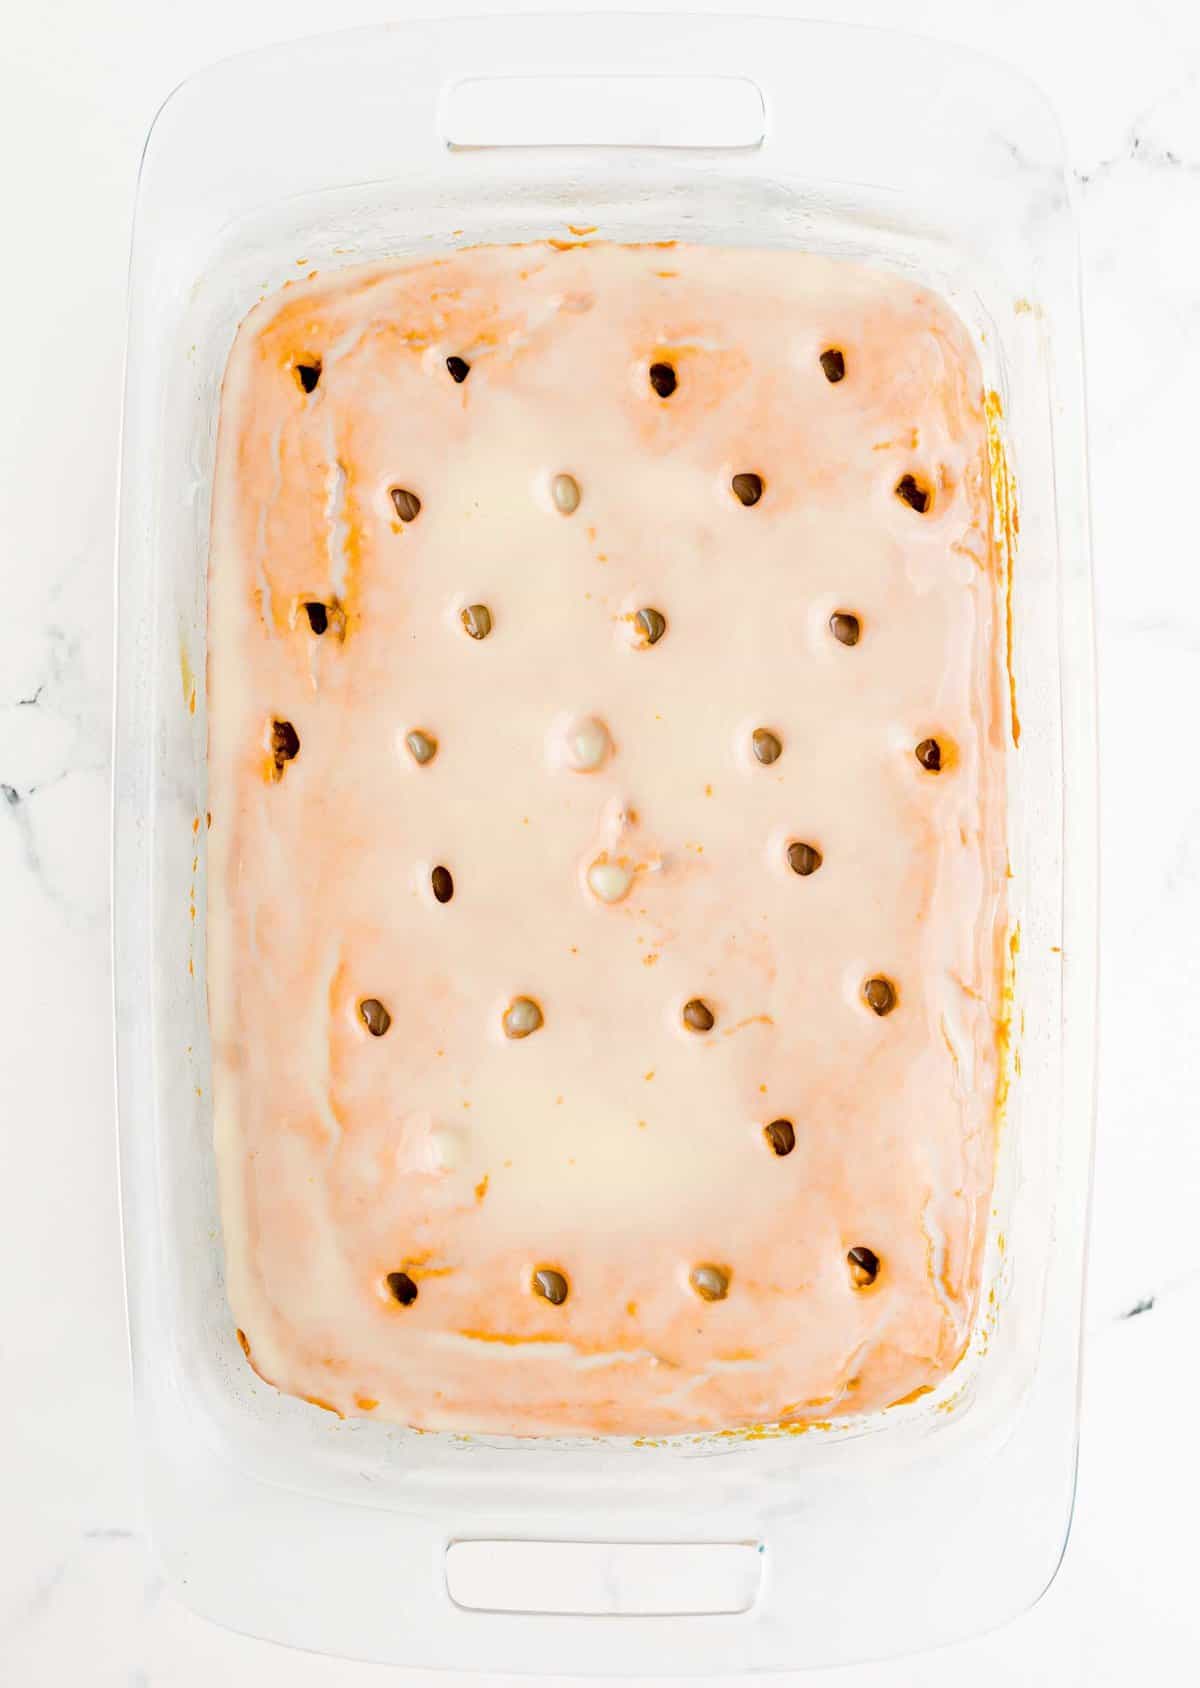 Pumpkin cake with holes and cream chilled